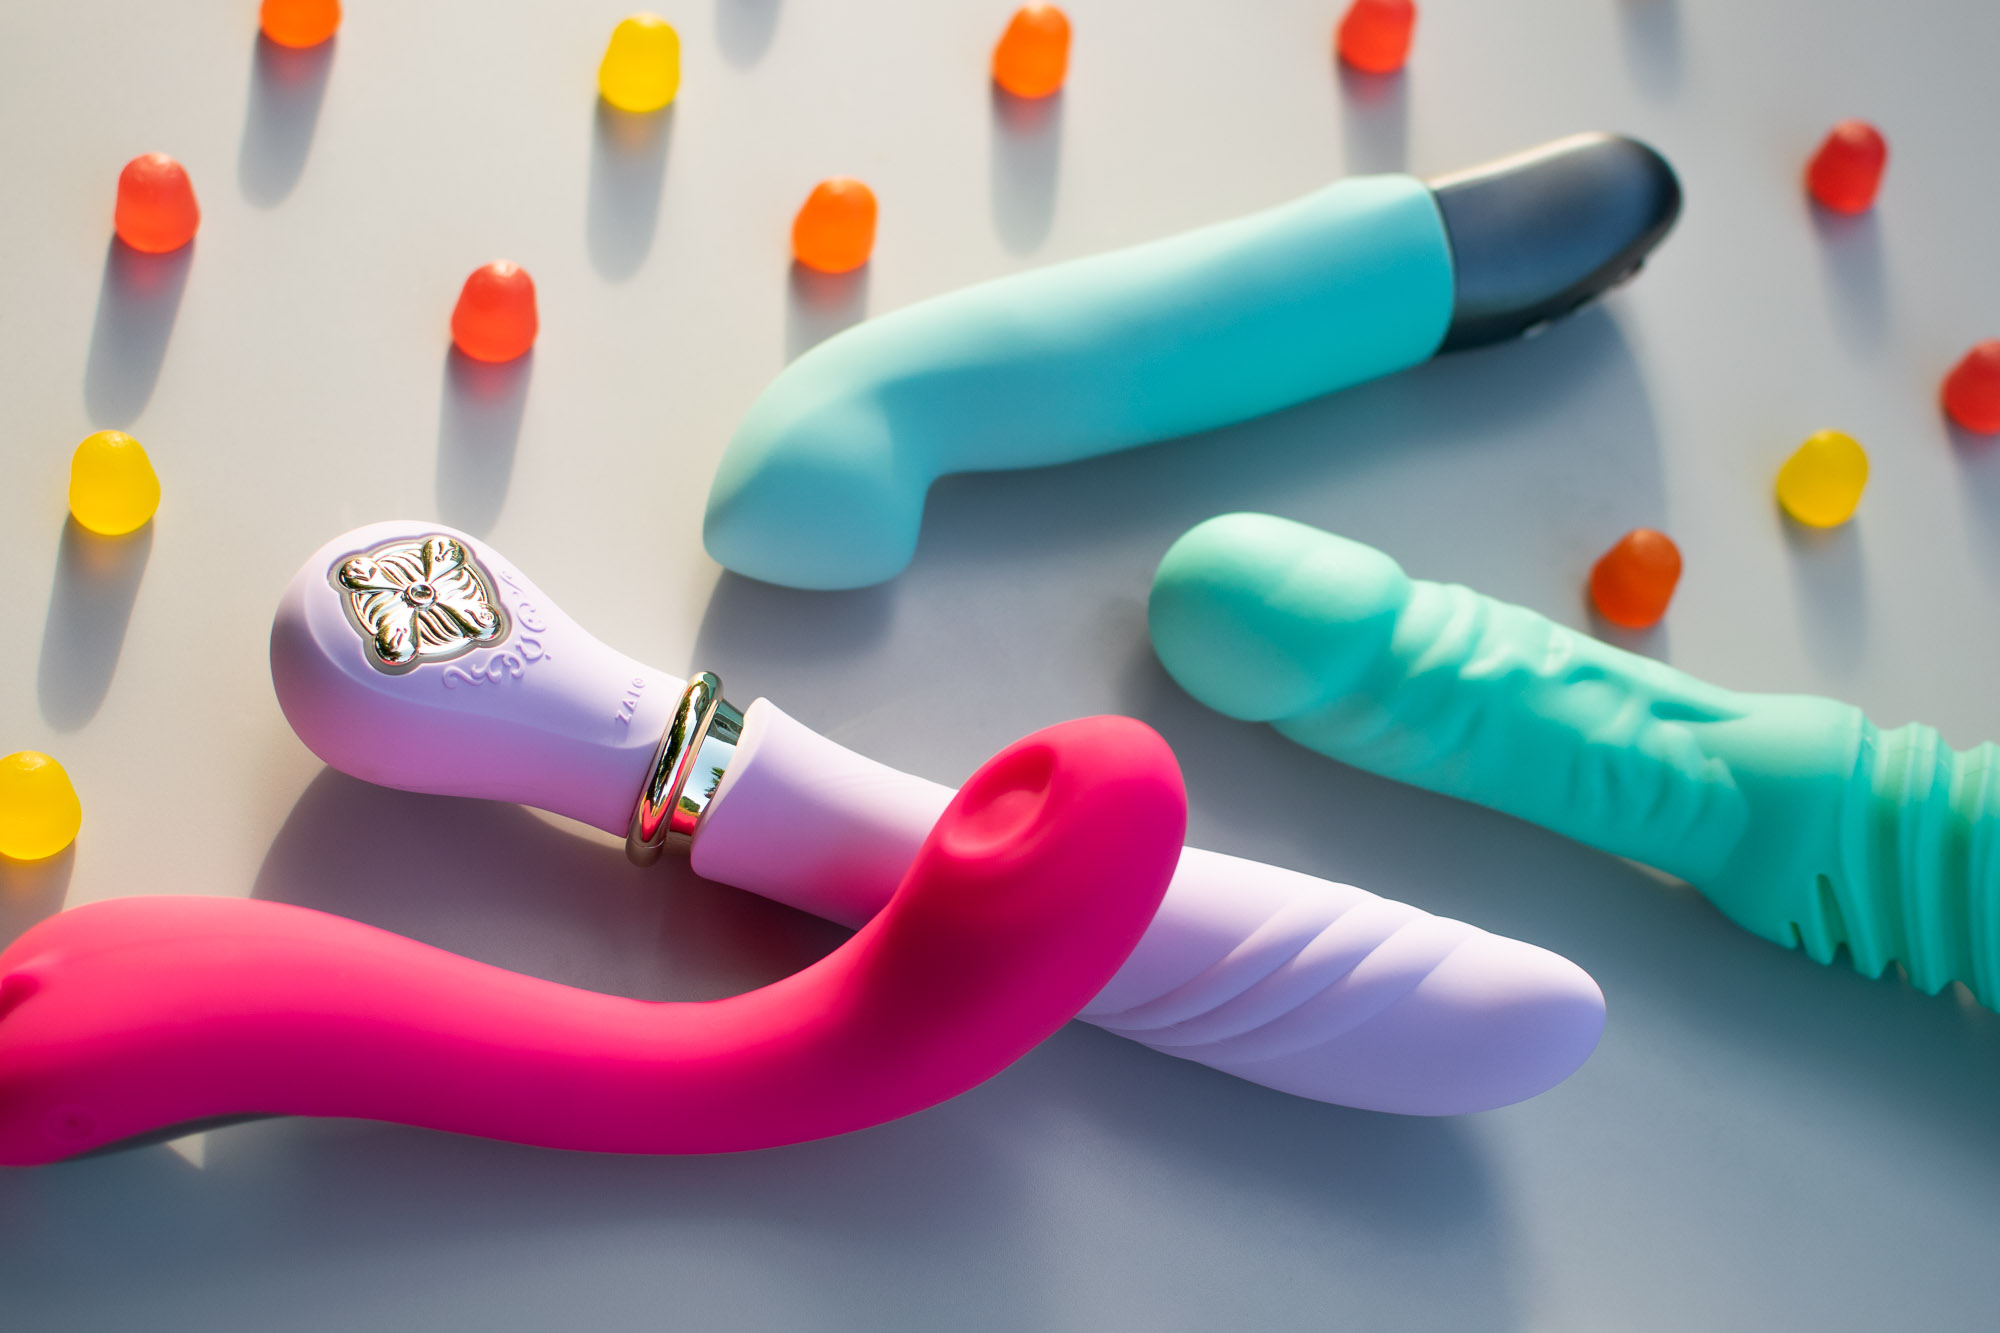 Other sex toys that move: Lovense Osci, Zalo Desire, Fun Factory Stronic G, and Velvet Thruster Mini Teddy.